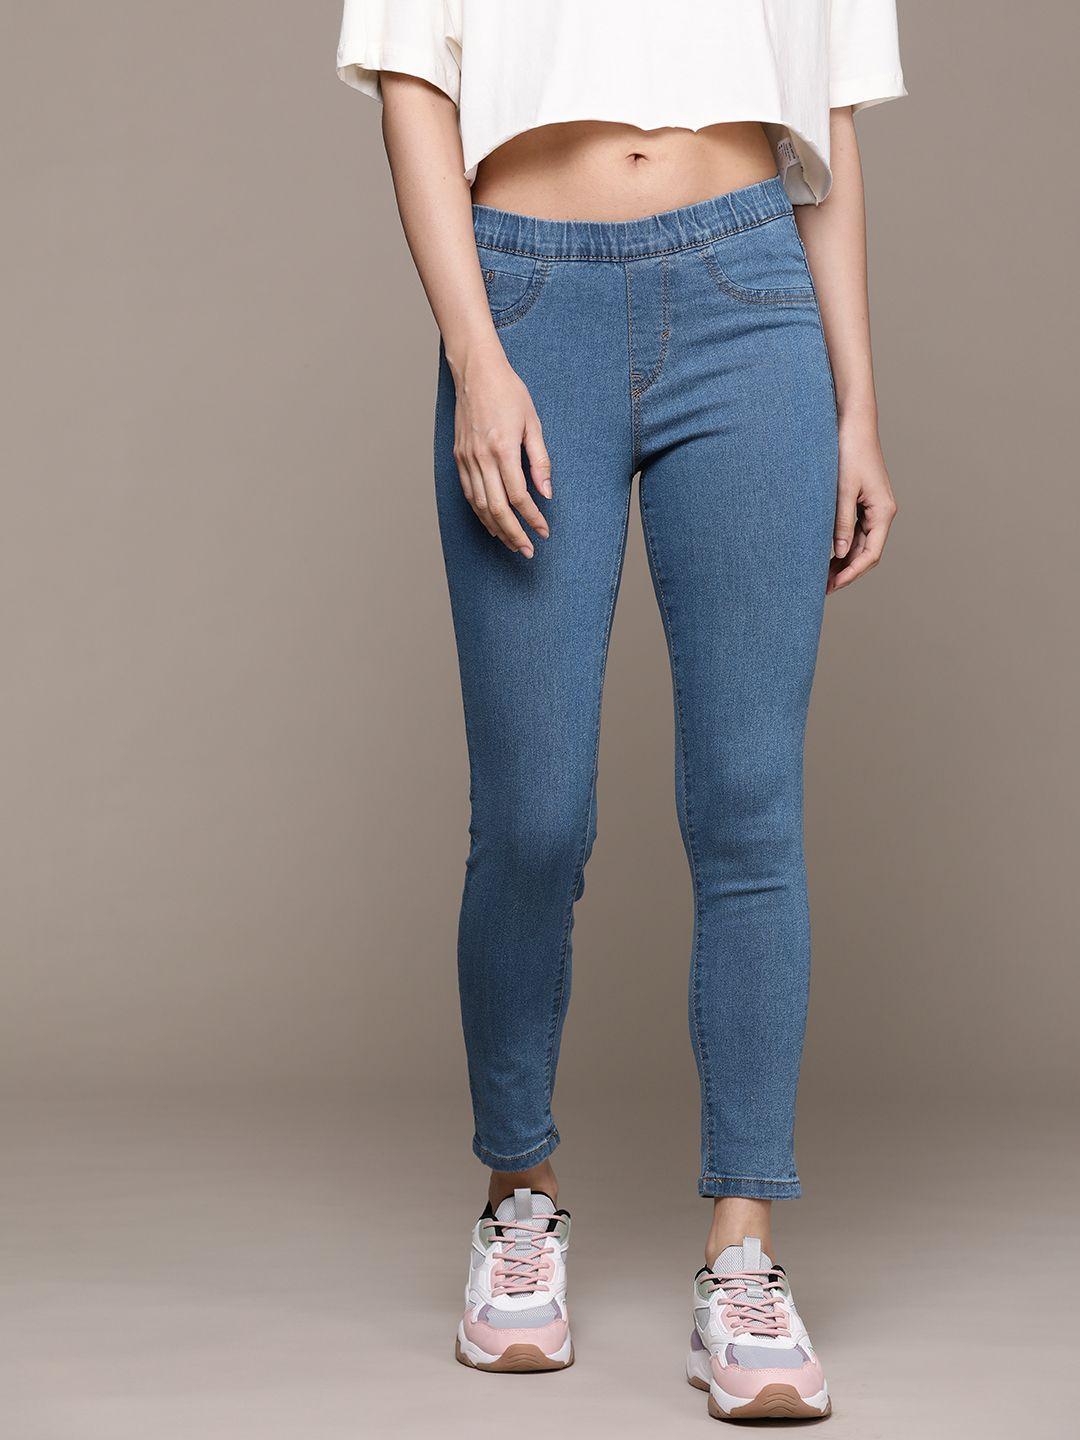 The Roadster Lifestyle Co. Women Super Skinny Fit Jeggings